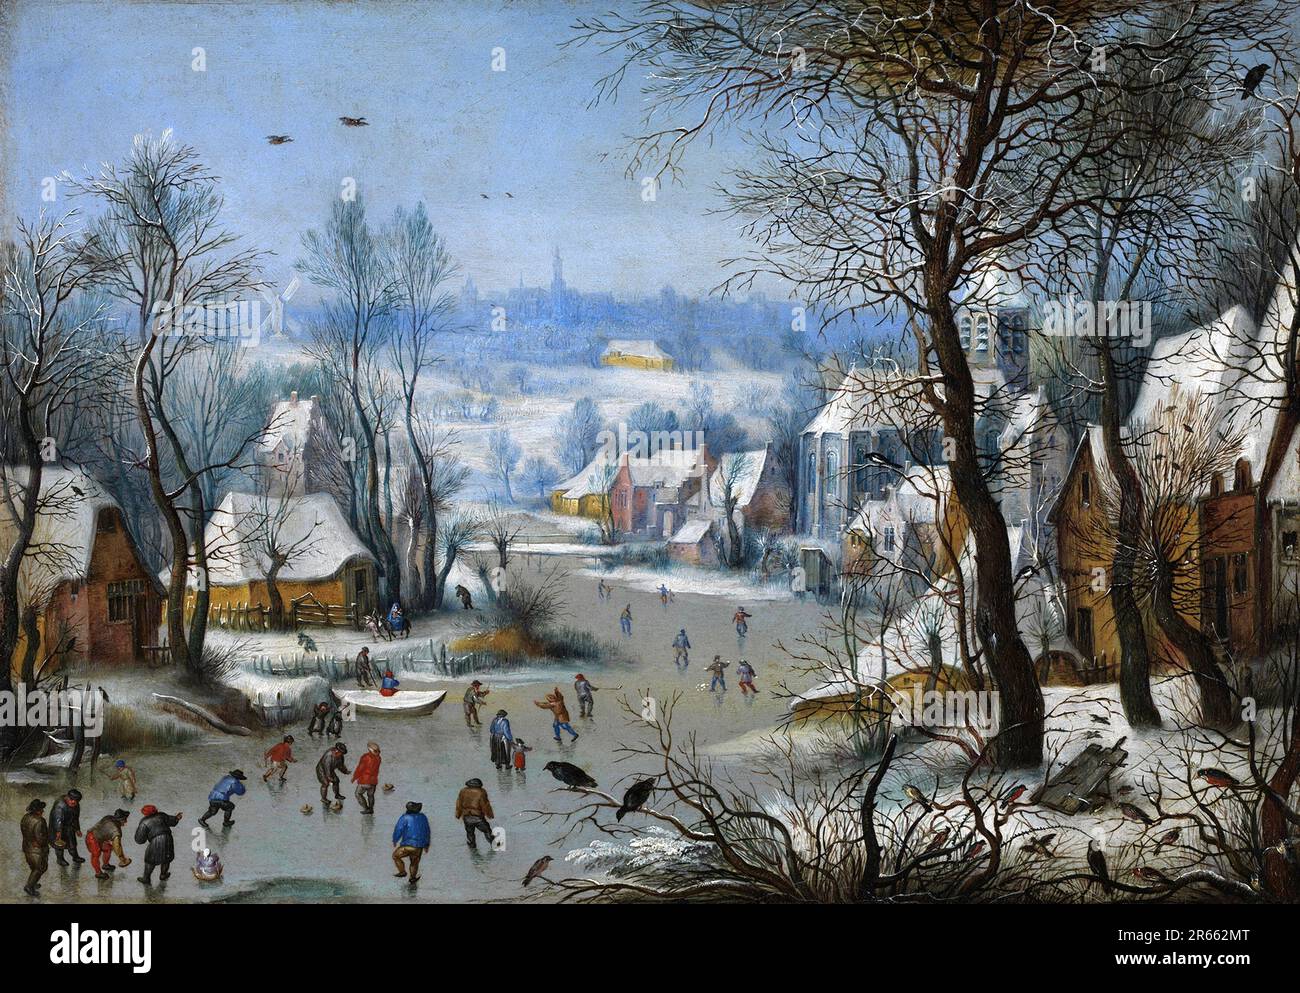 Winter Landscape with Skaters and a Bird Trap painted by the Dutch Renaissance painter Pieter Breughel the Elder in 1565. Breughel was the most important painter of the Dutch and Flemish Renaissance. His choice of subjects was influential, he rejected portraits and religious scenes in favour of local and peasant scenes. Stock Photo